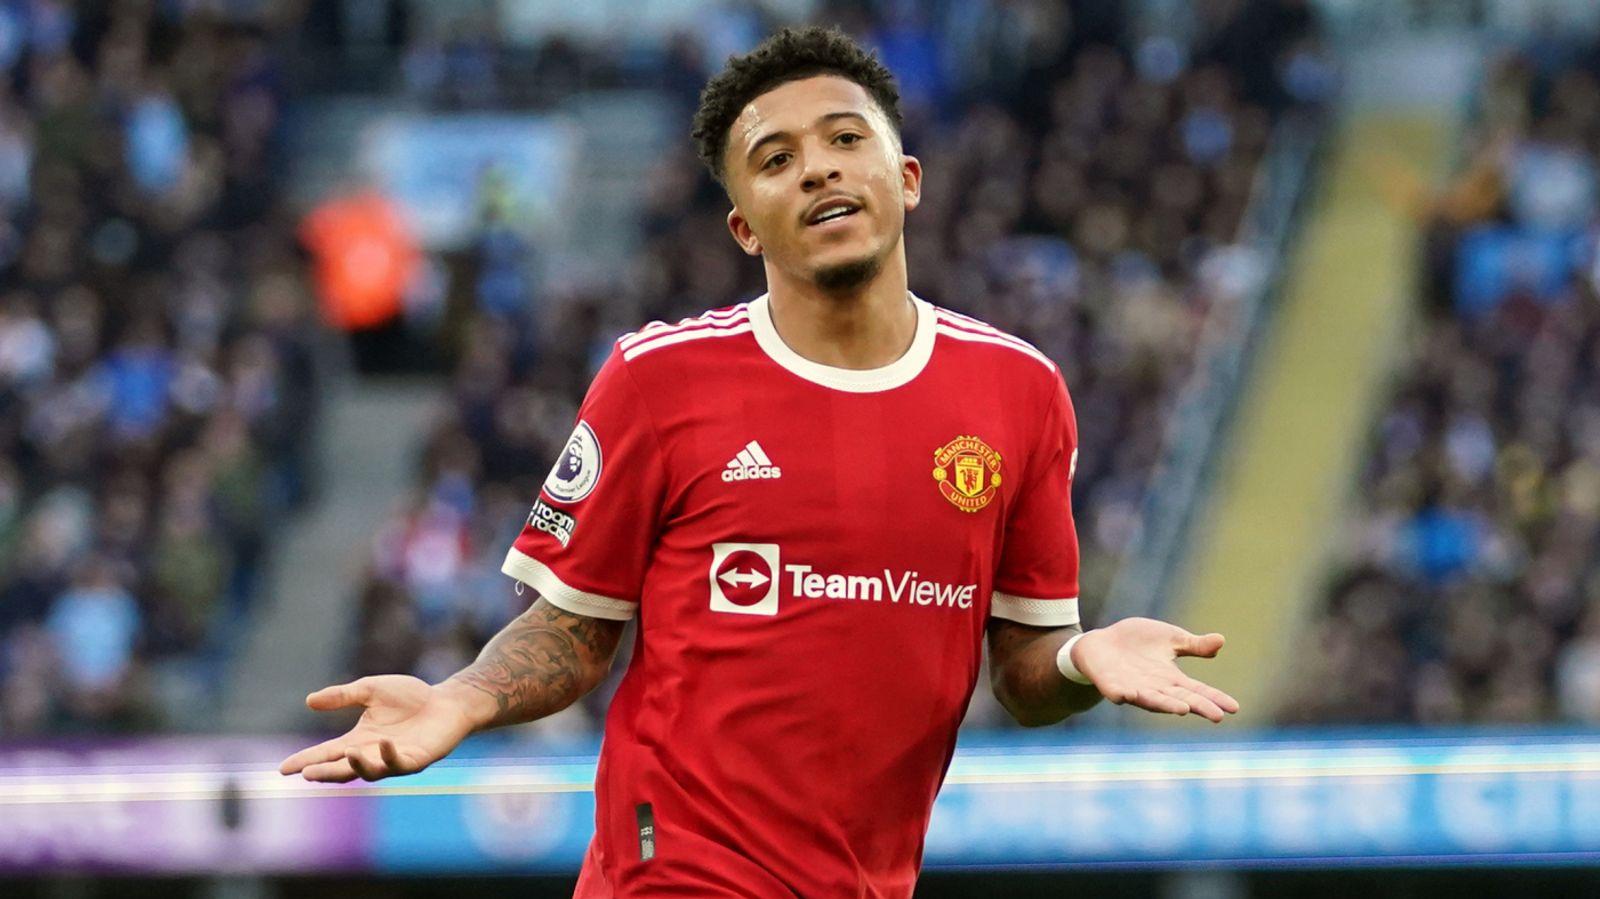 Jadon Sancho Approaching Best Manchester United Form Says Ralf